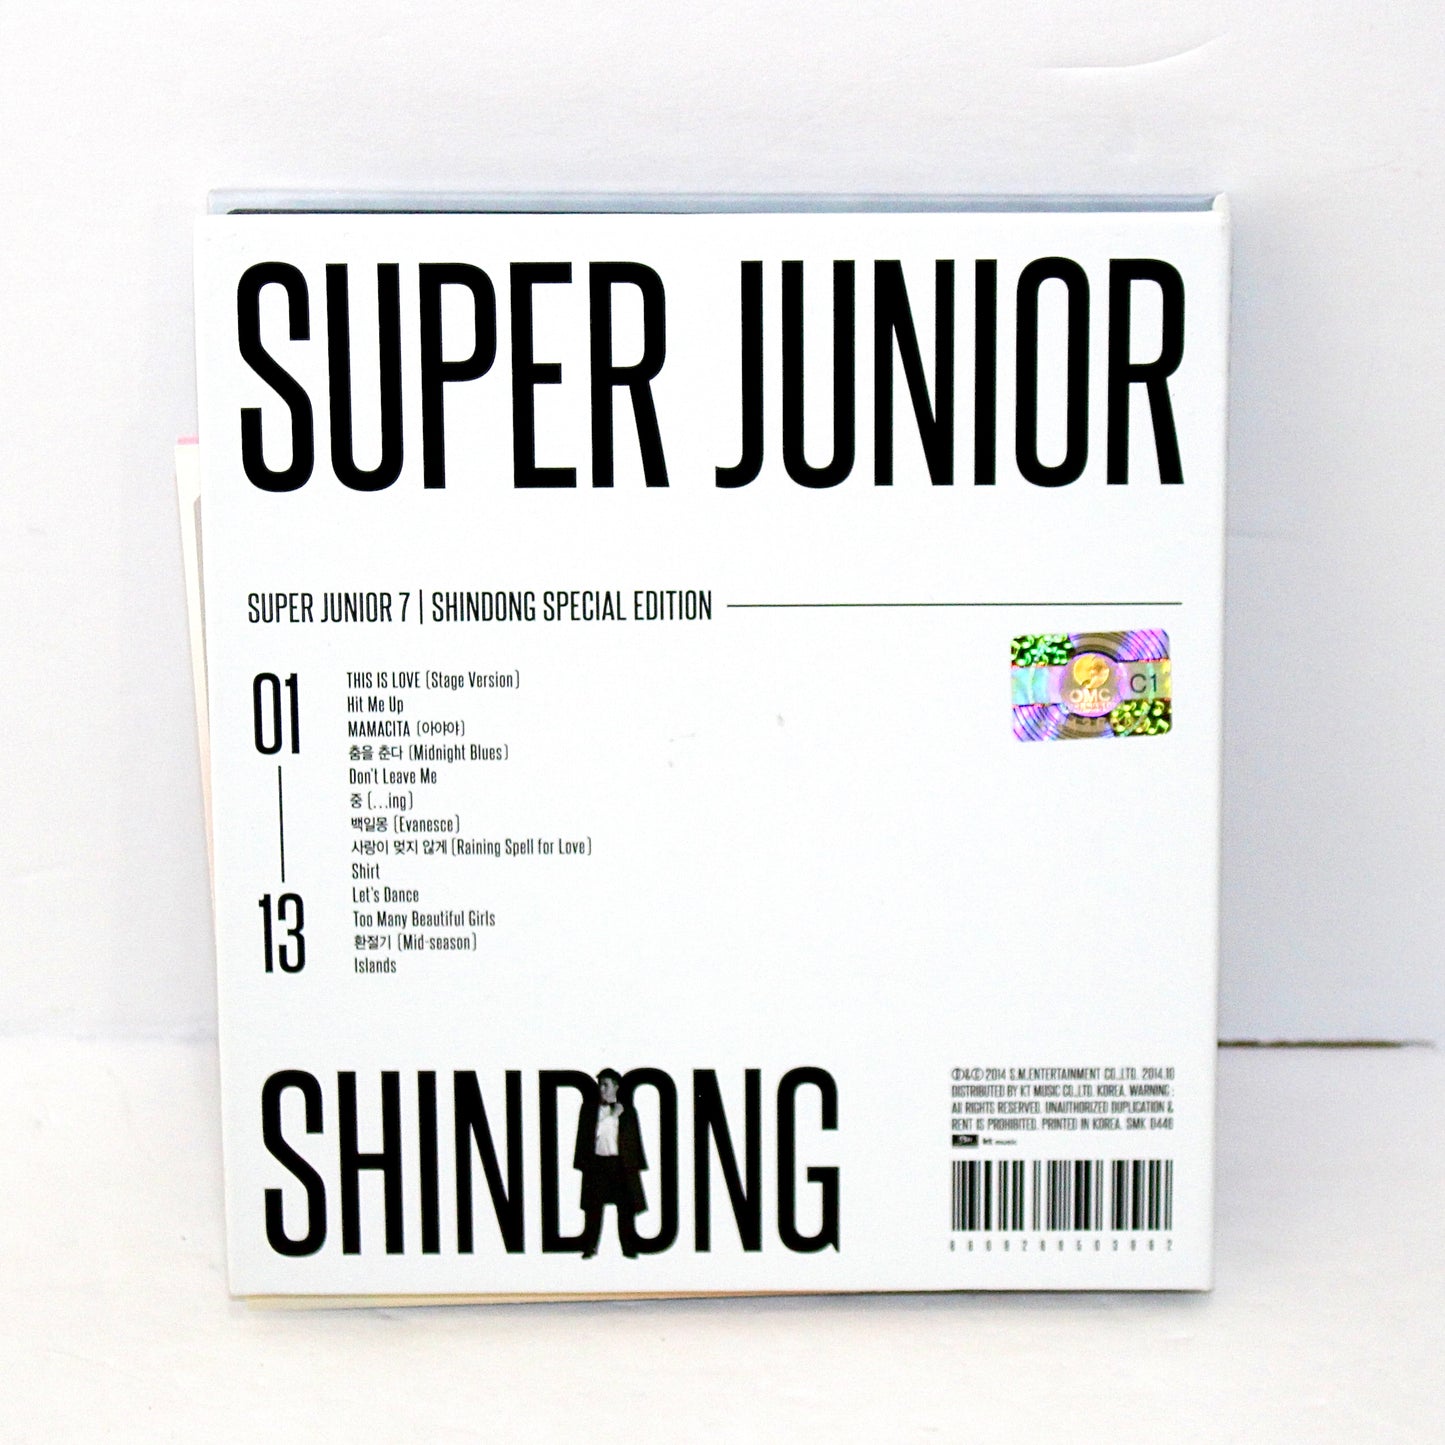 SUPER JUNIOR 7th Album Special Edition: This Is Love | Shindong Ver.